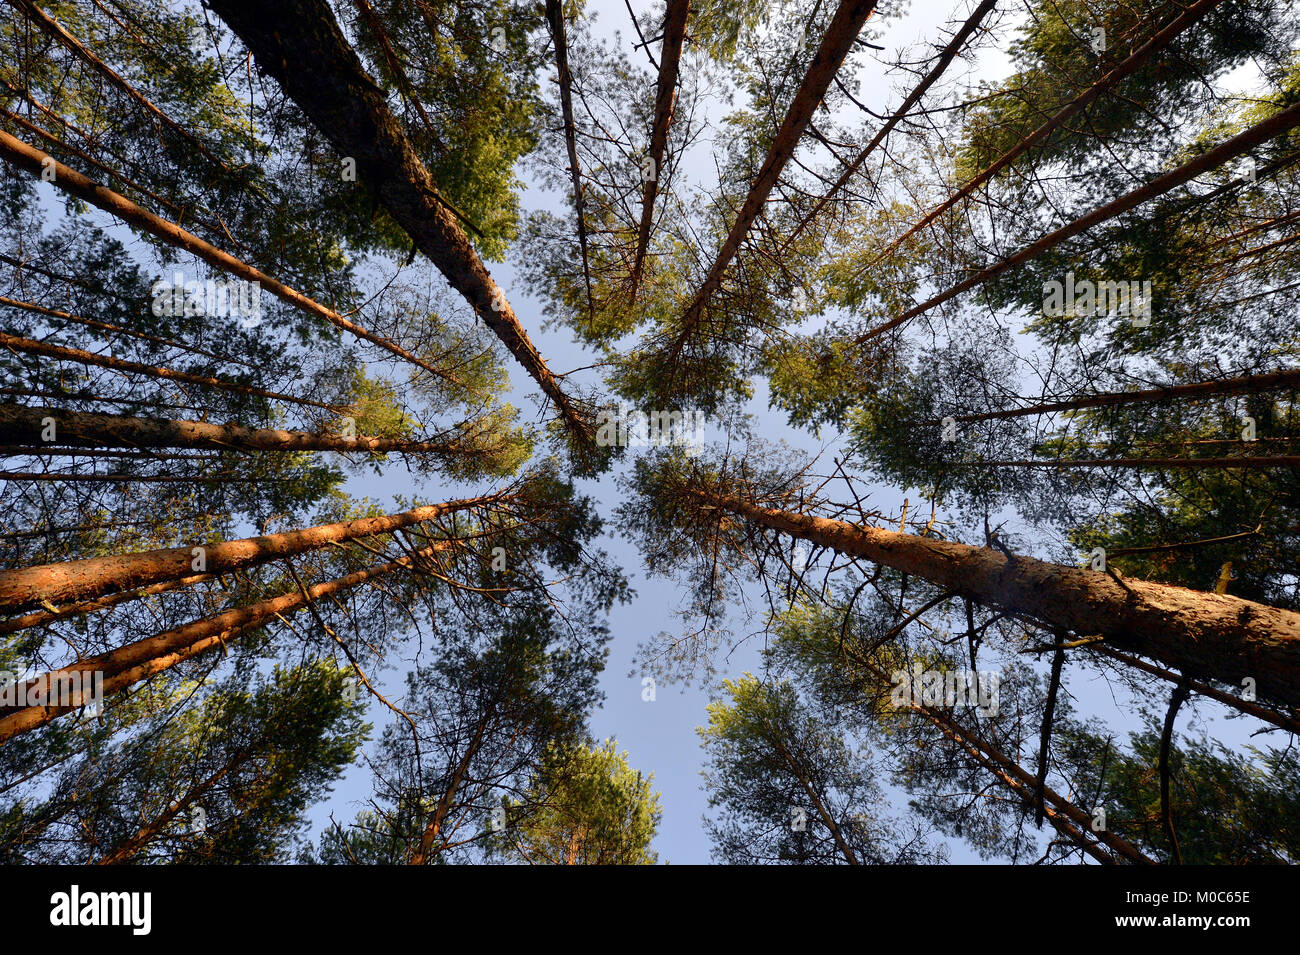 Opening of blue sky between pine trees branches in forest Stock Photo